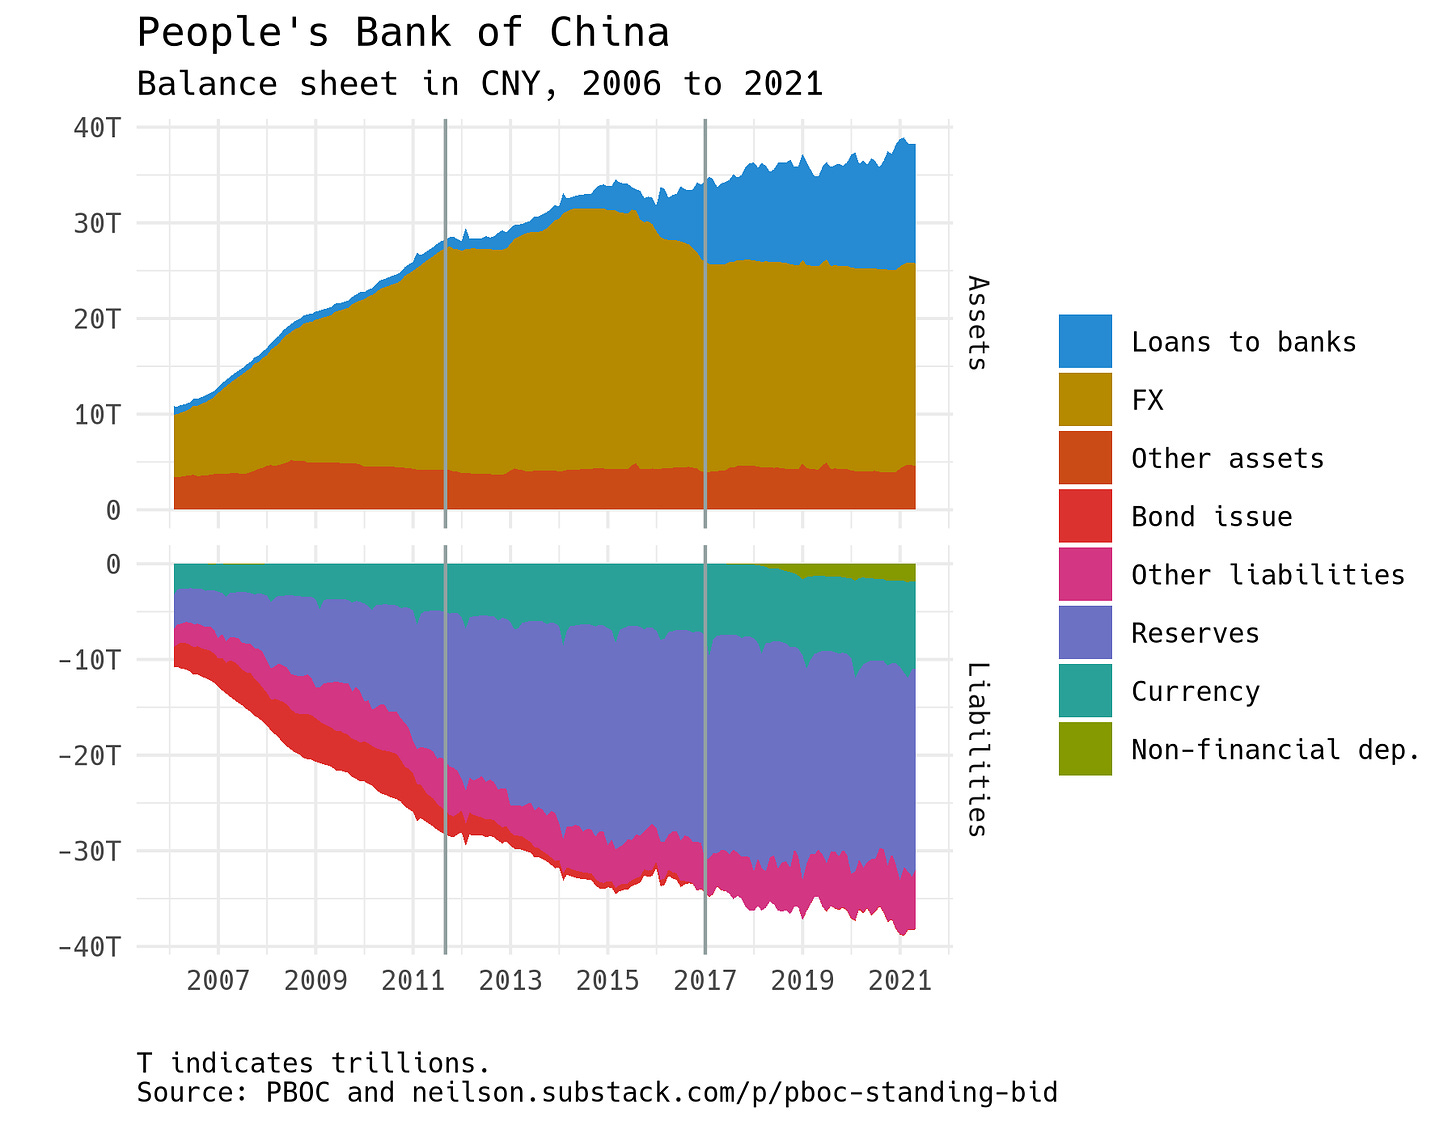 Graph showing changes in the PBOC's balance sheet over time